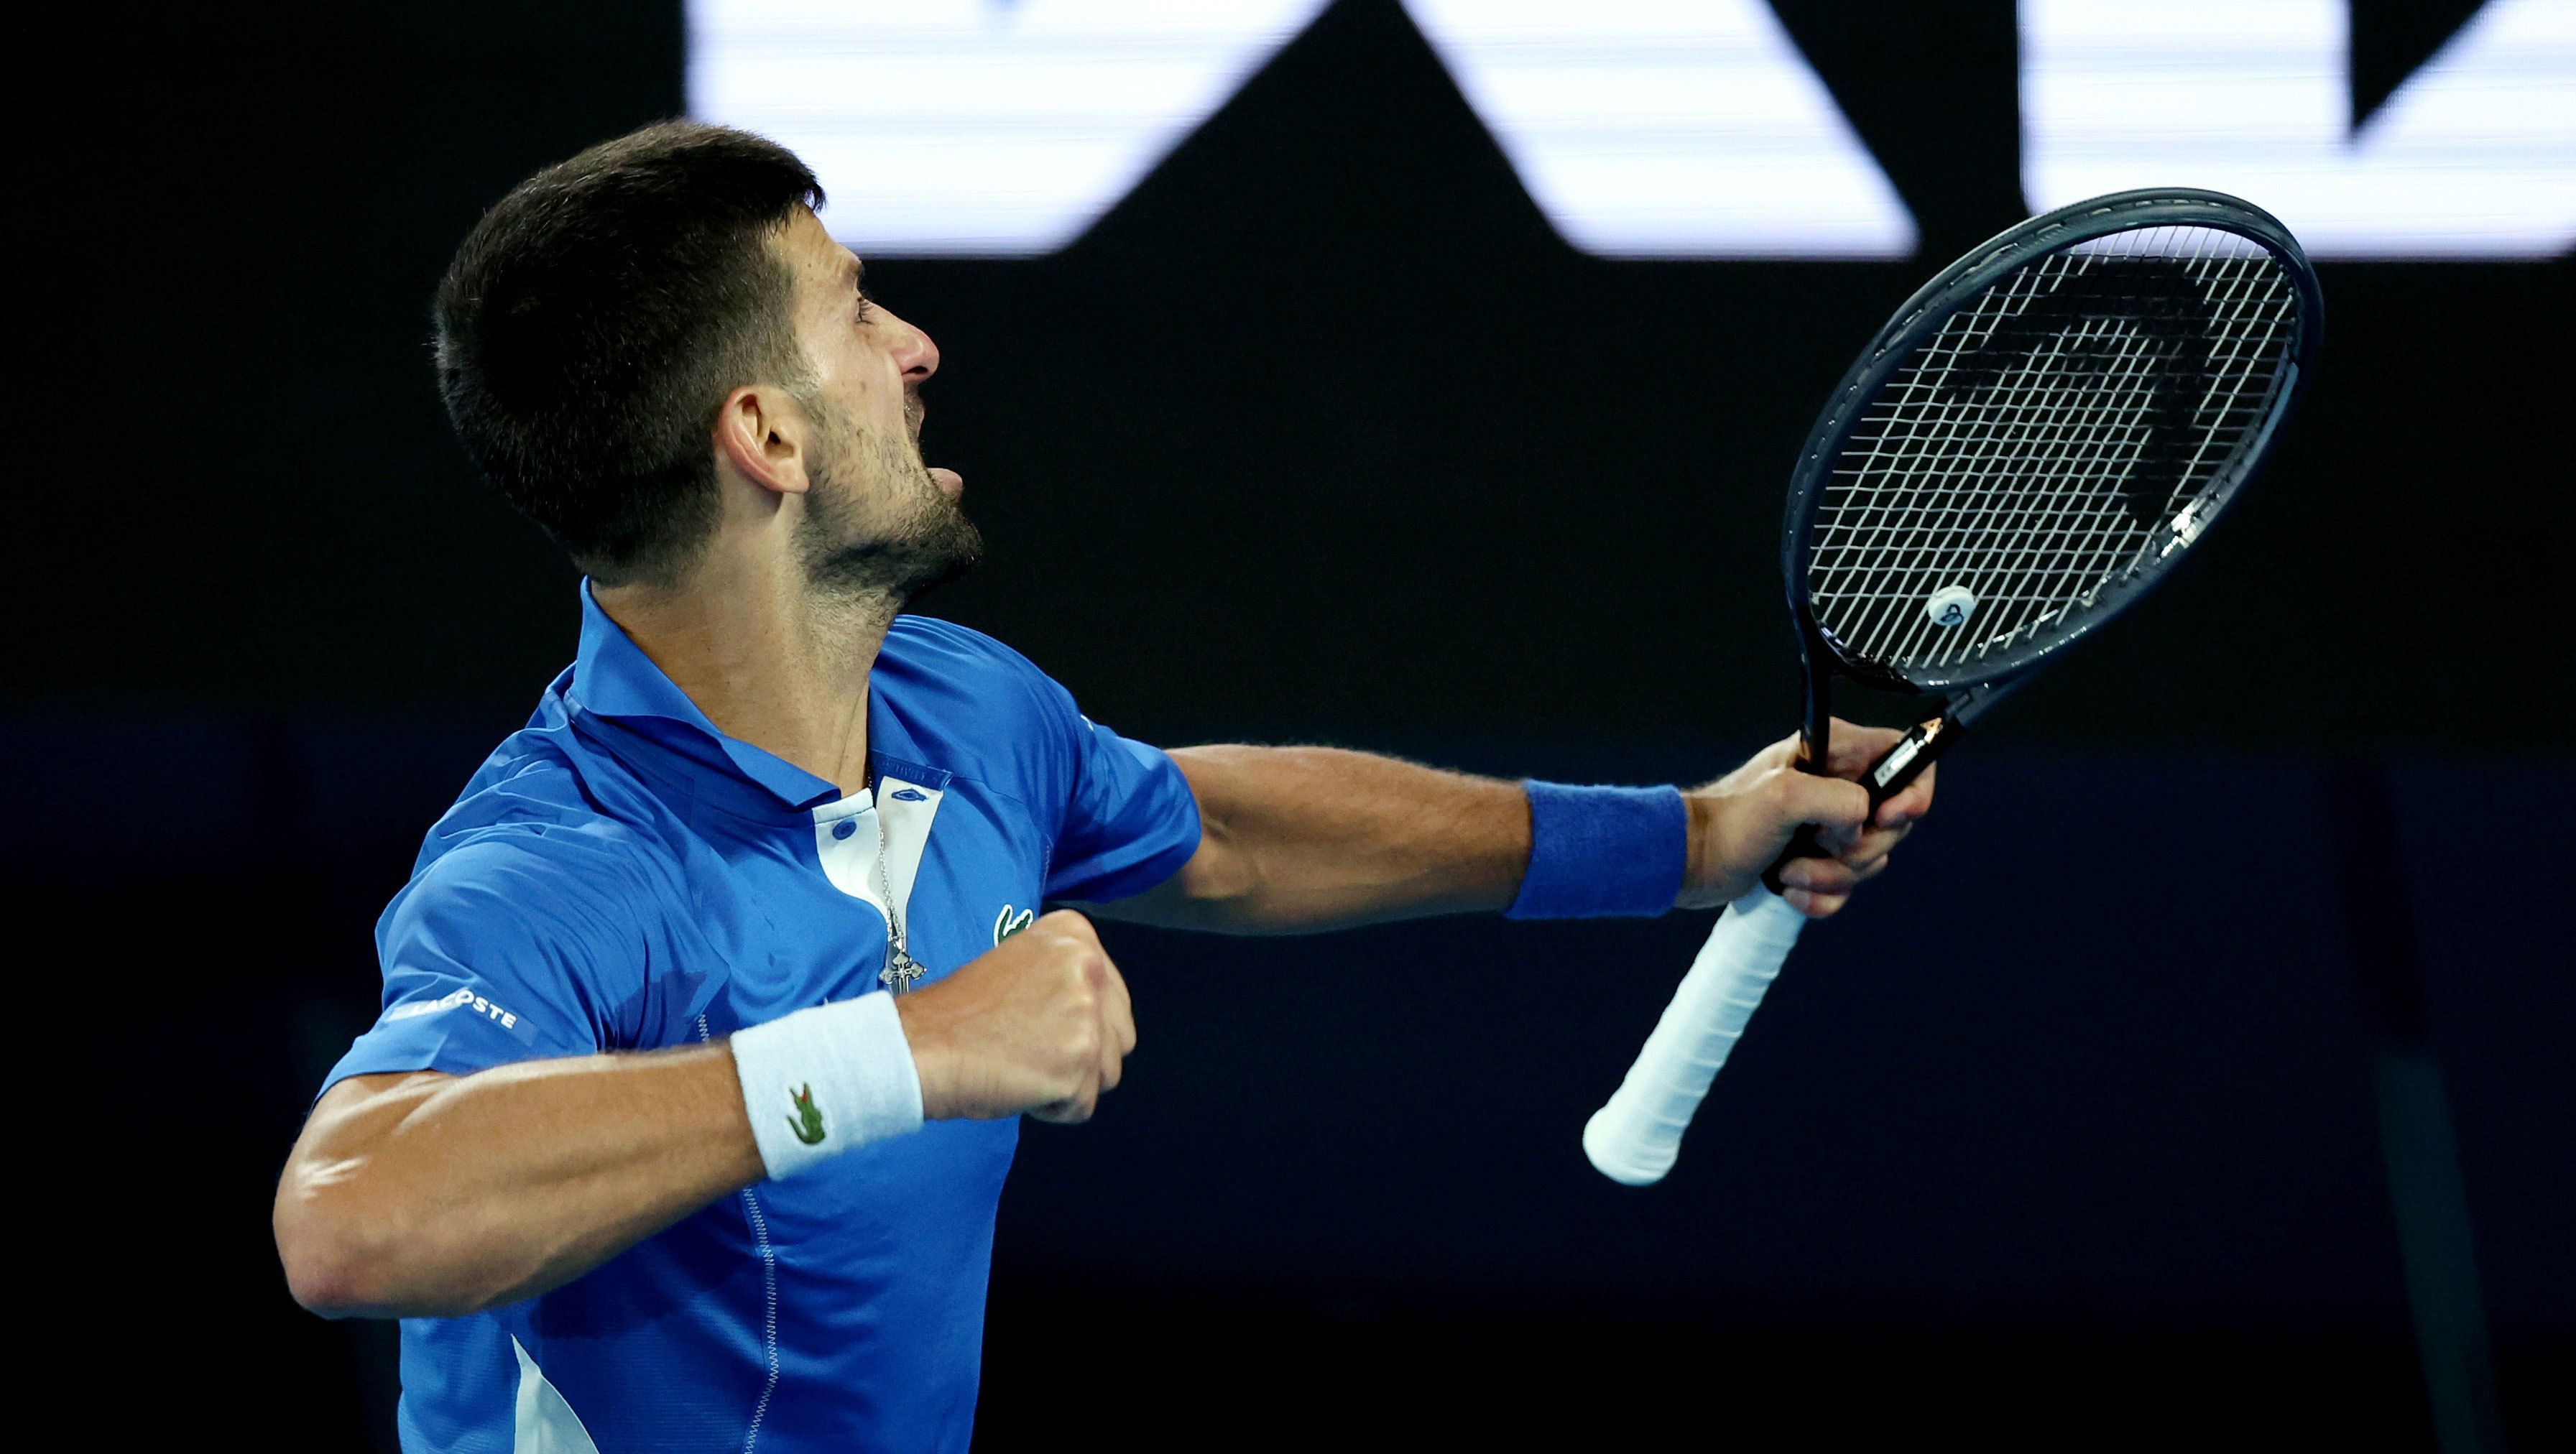 Novak Djokovic celebrates after clinching victory in his second round match against Alexei Popyrin at the Australian Open.